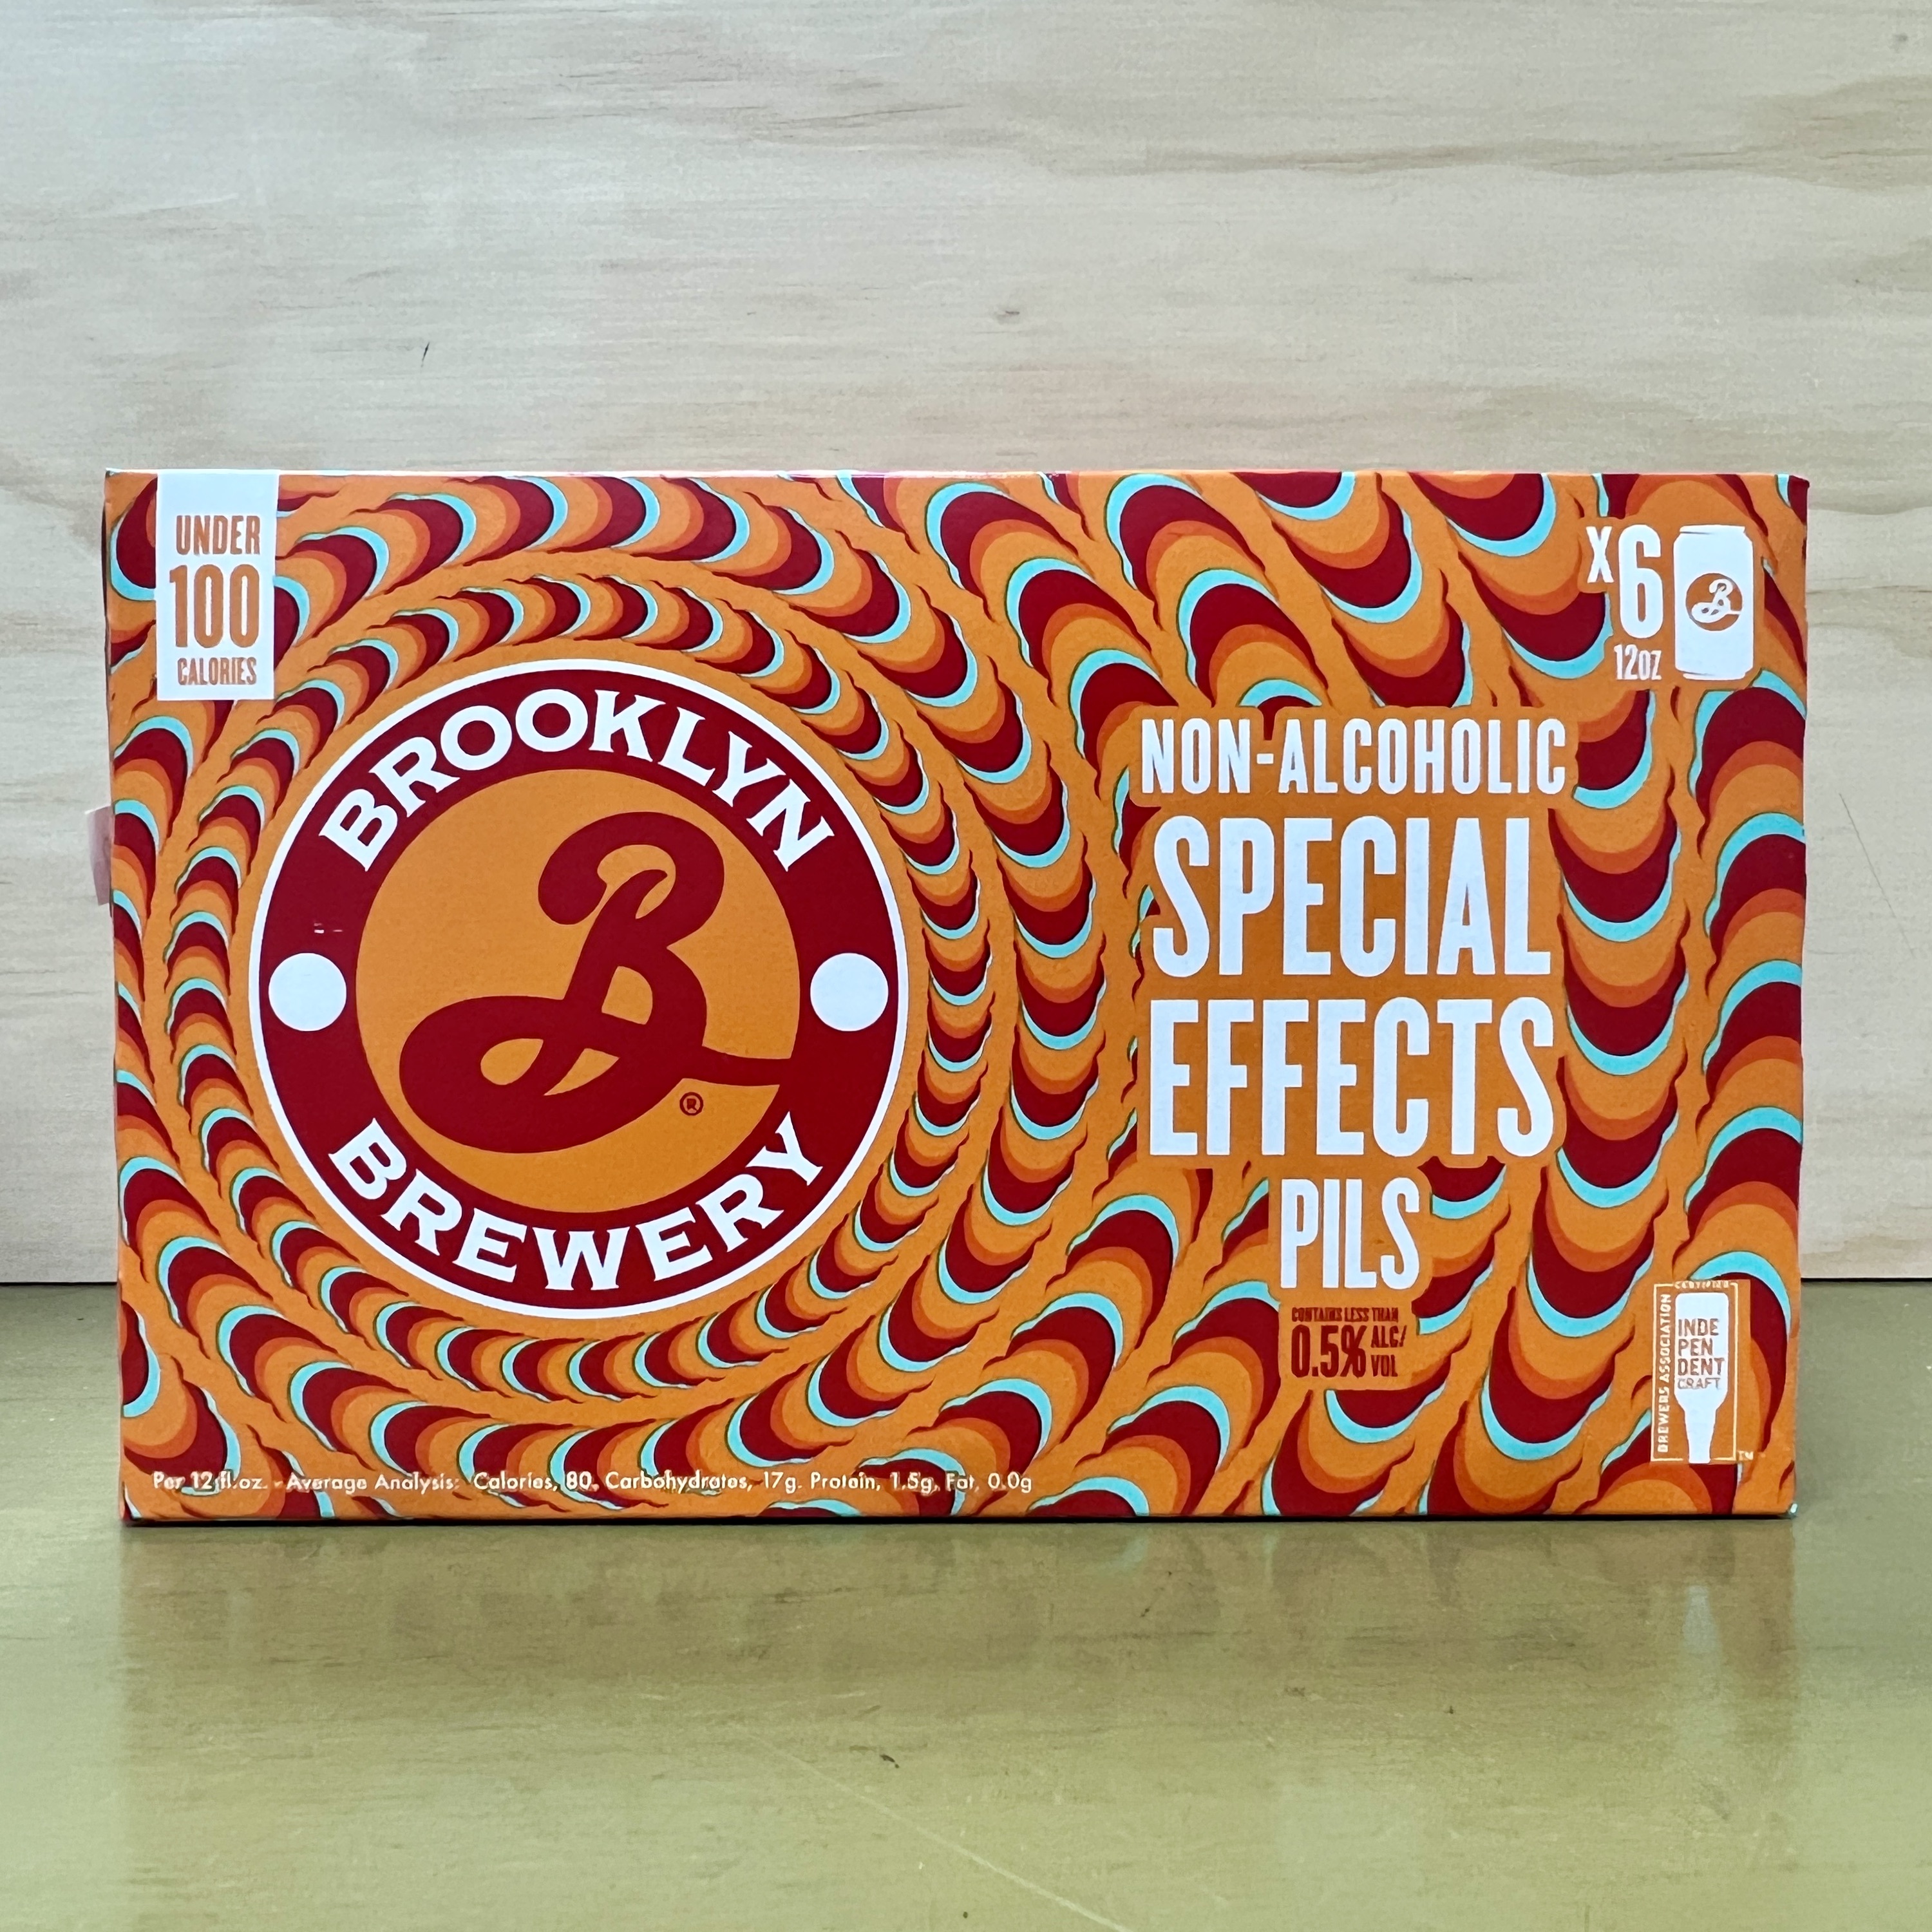 Brooklyn Brewery Non-alcoholic Special Effects Pils